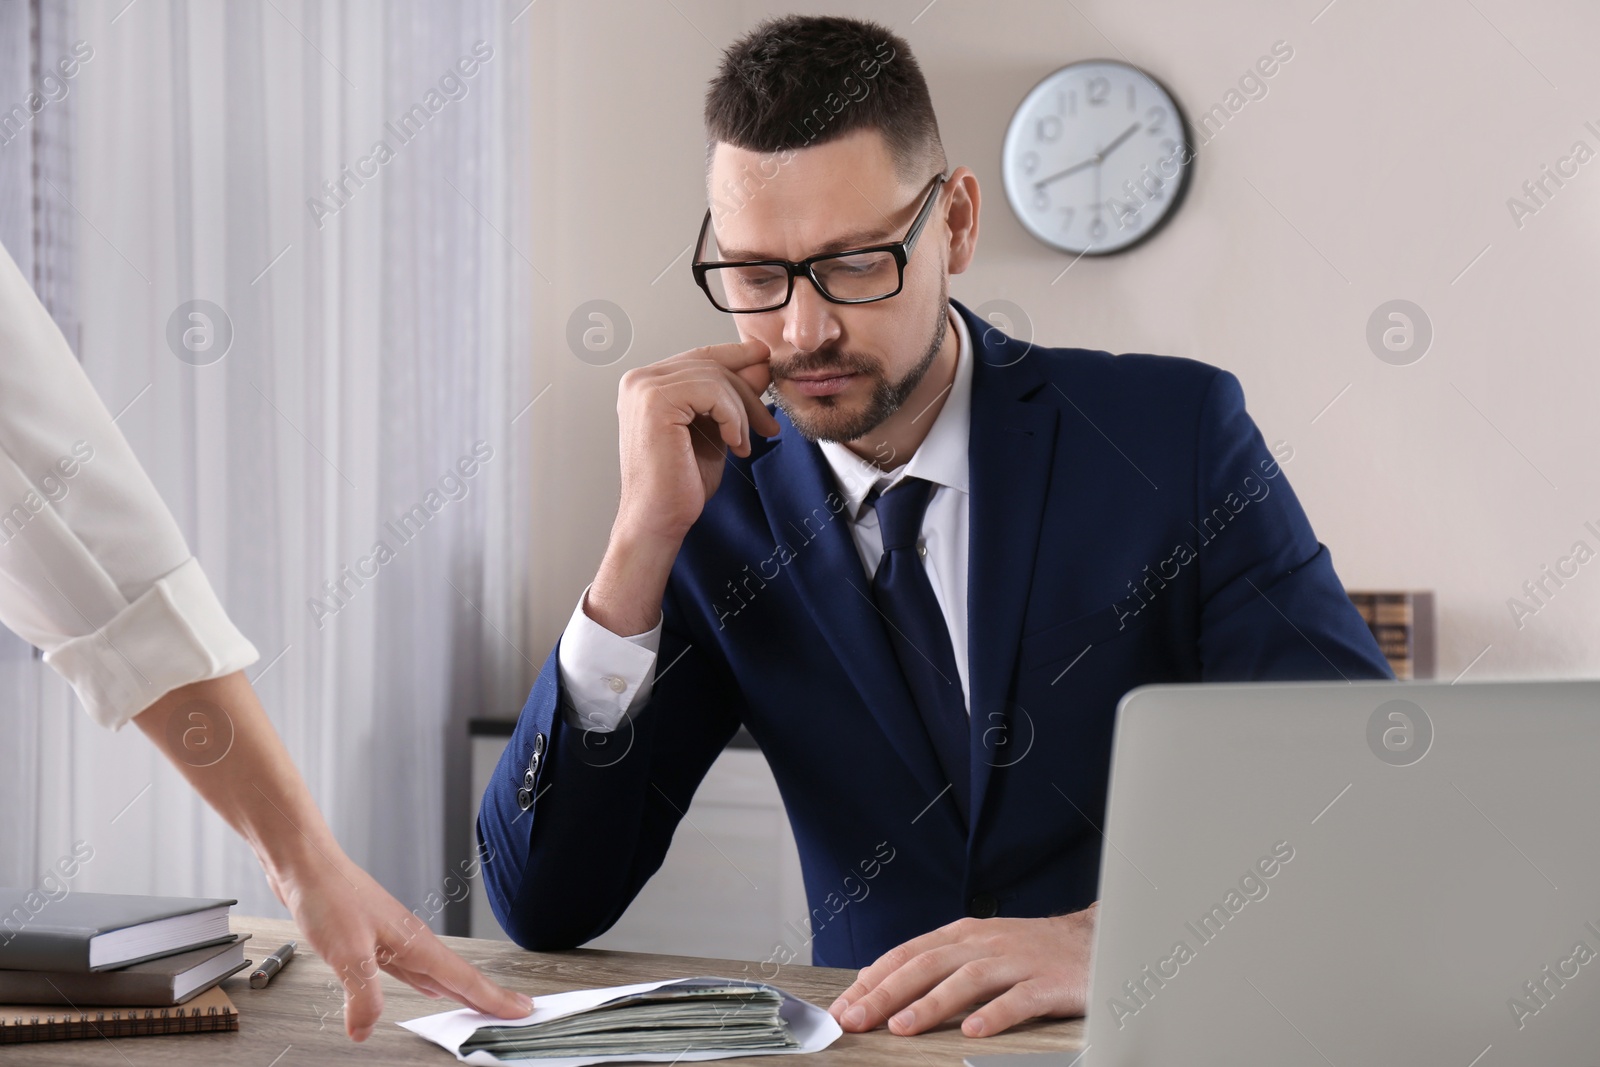 Photo of Woman offering bribe to man at table in office